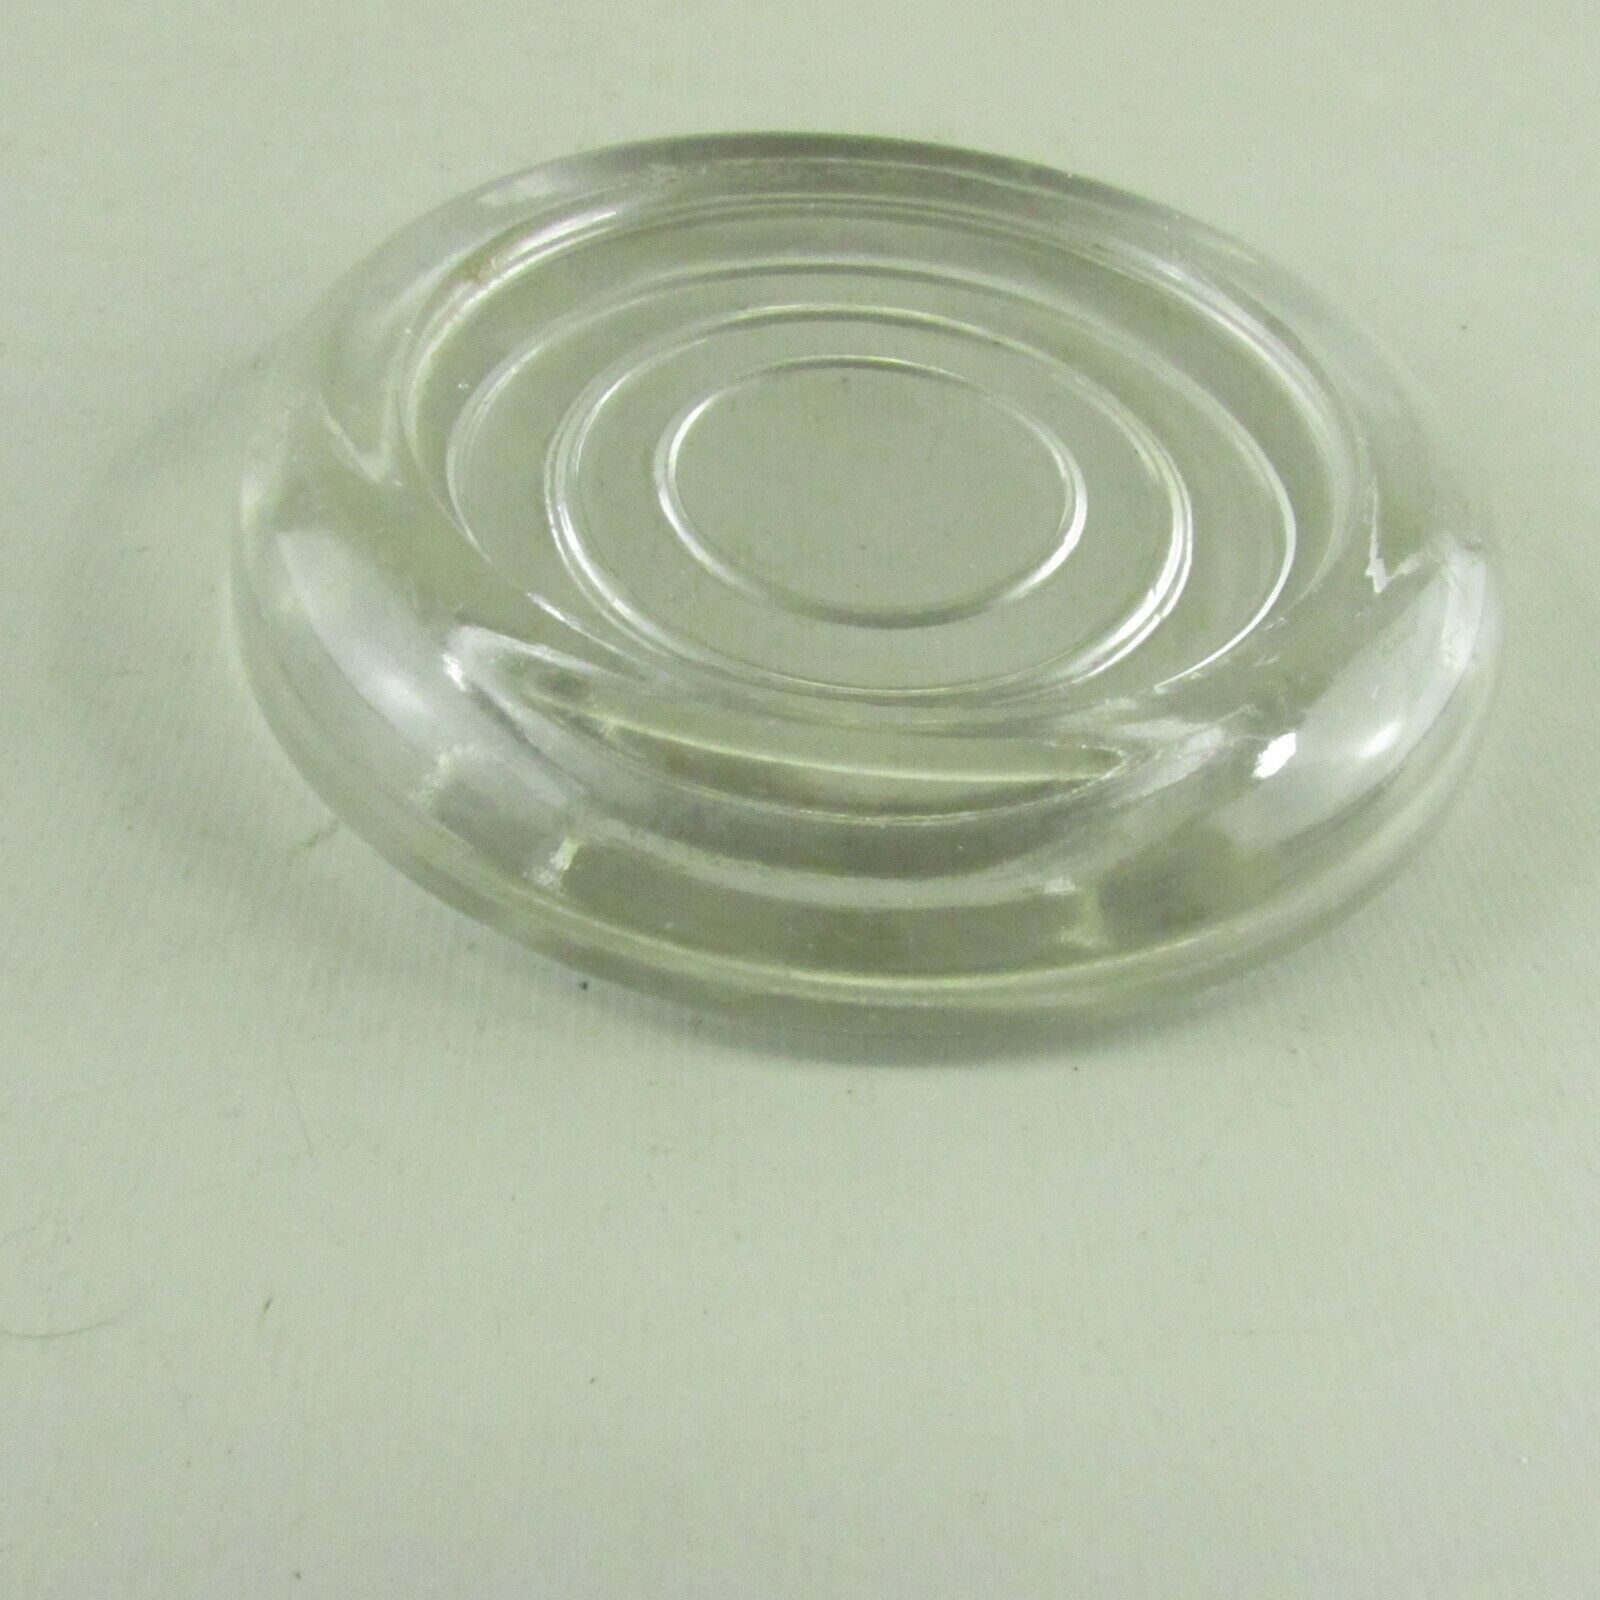 Large Clear Depression Glass Furniture Floor Protector Coaster 3.75" Diameter